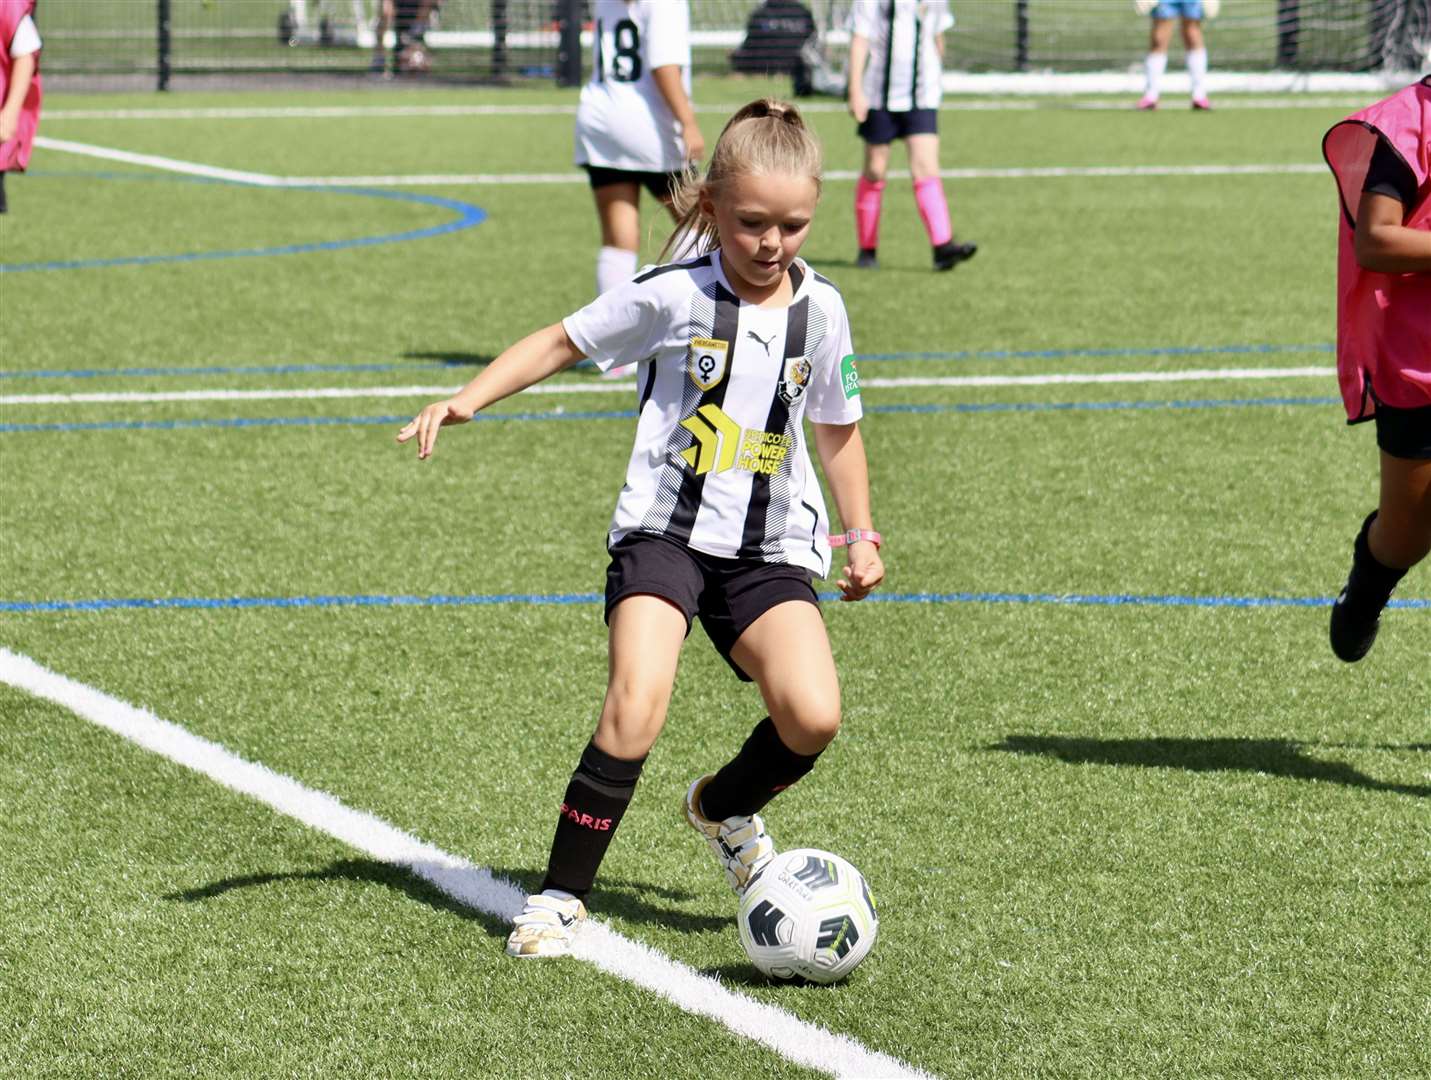 Young footballer Ella loves playing football but felt unhappy. Picture: Alex Barber